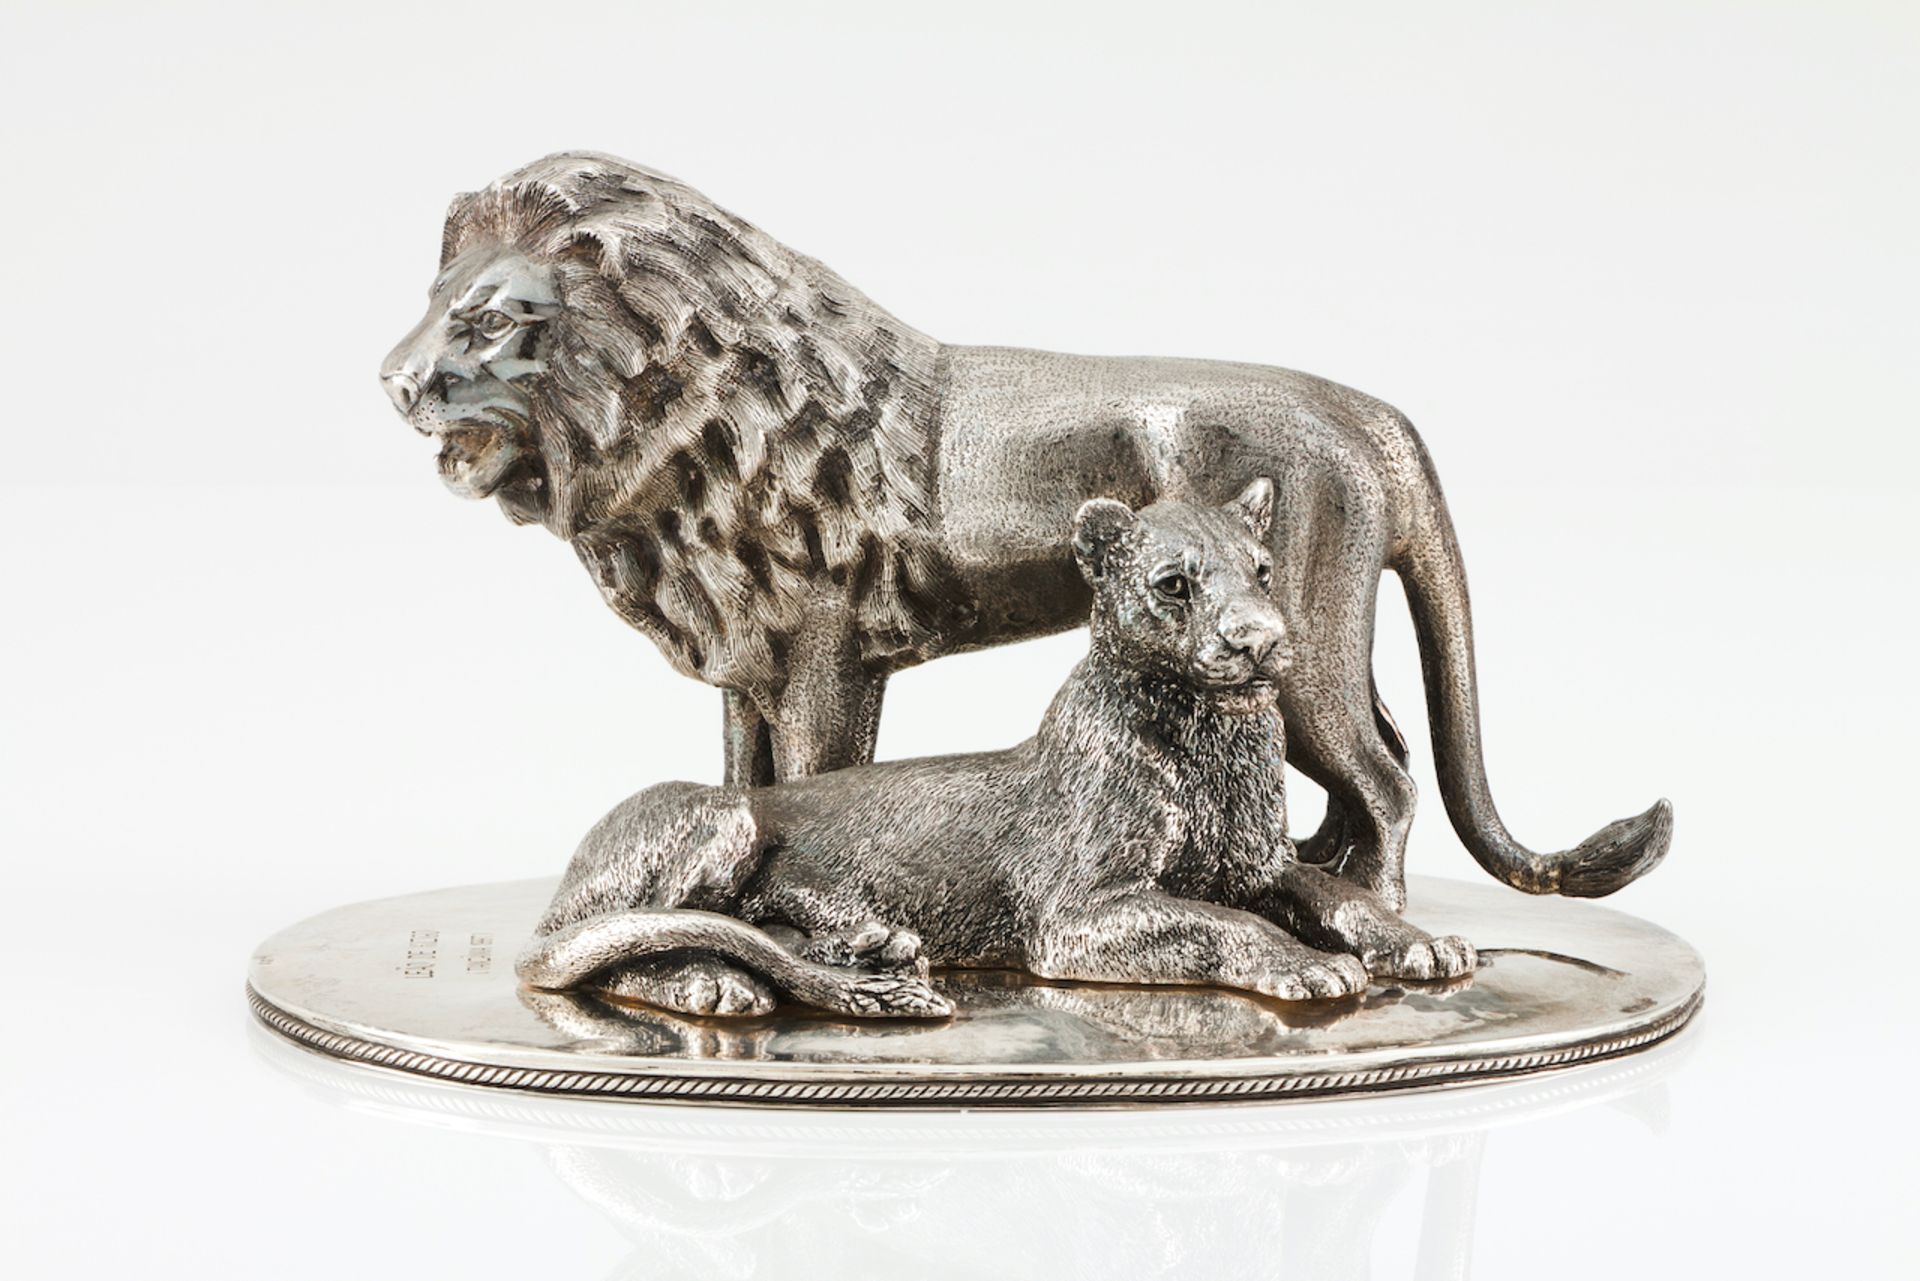 A pair of lionsPortuguese silverSculpture depicting a Kizigo (Tanzania) lion and lioness on an